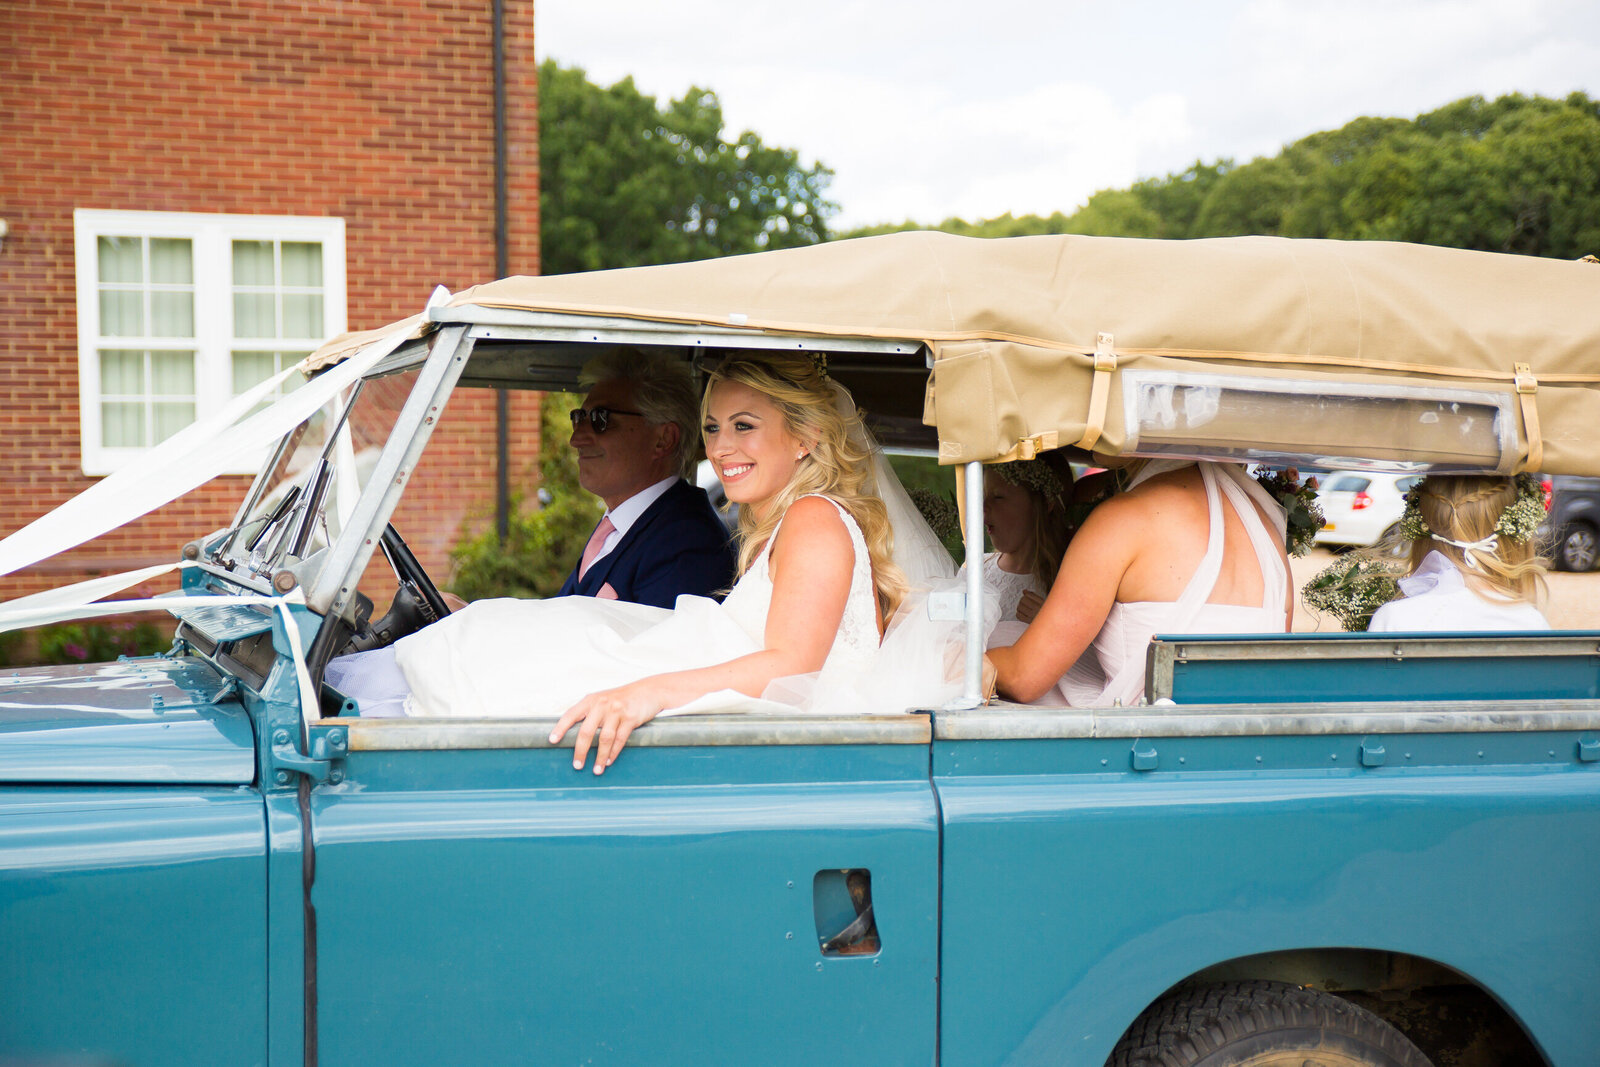 Wedding photography of a bride in a car on her way to get married at Highfield School Capel in Surrey. Photography by Lynsey Grace Photography.